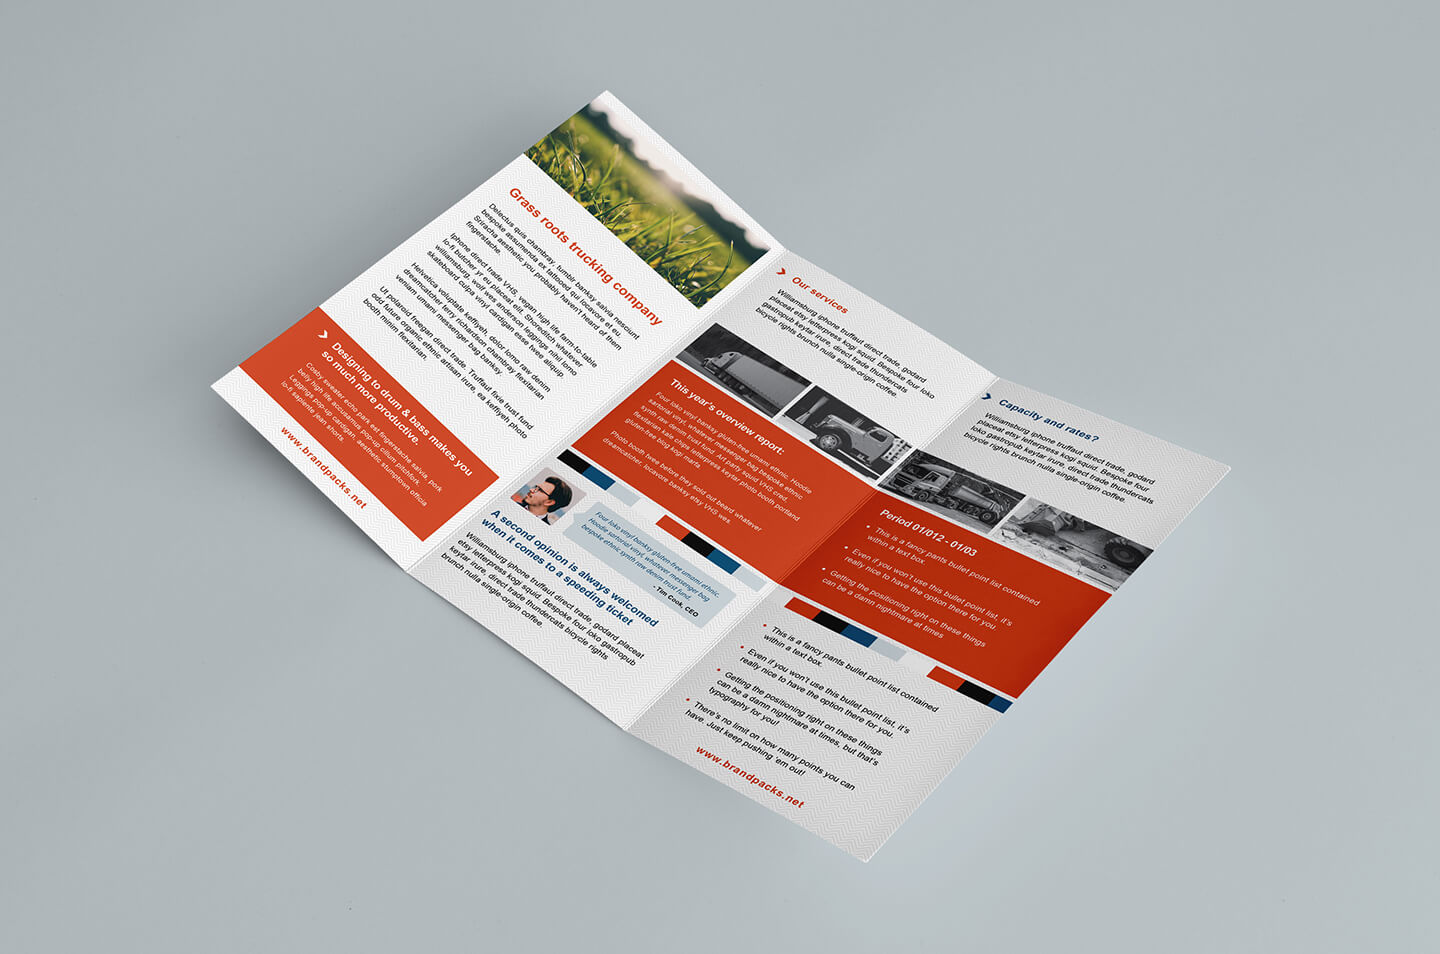 027 Tri Fold Brochure Template Free Download Ai Psd Trifold Intended For Adobe Illustrator Tri Fold Brochure Template